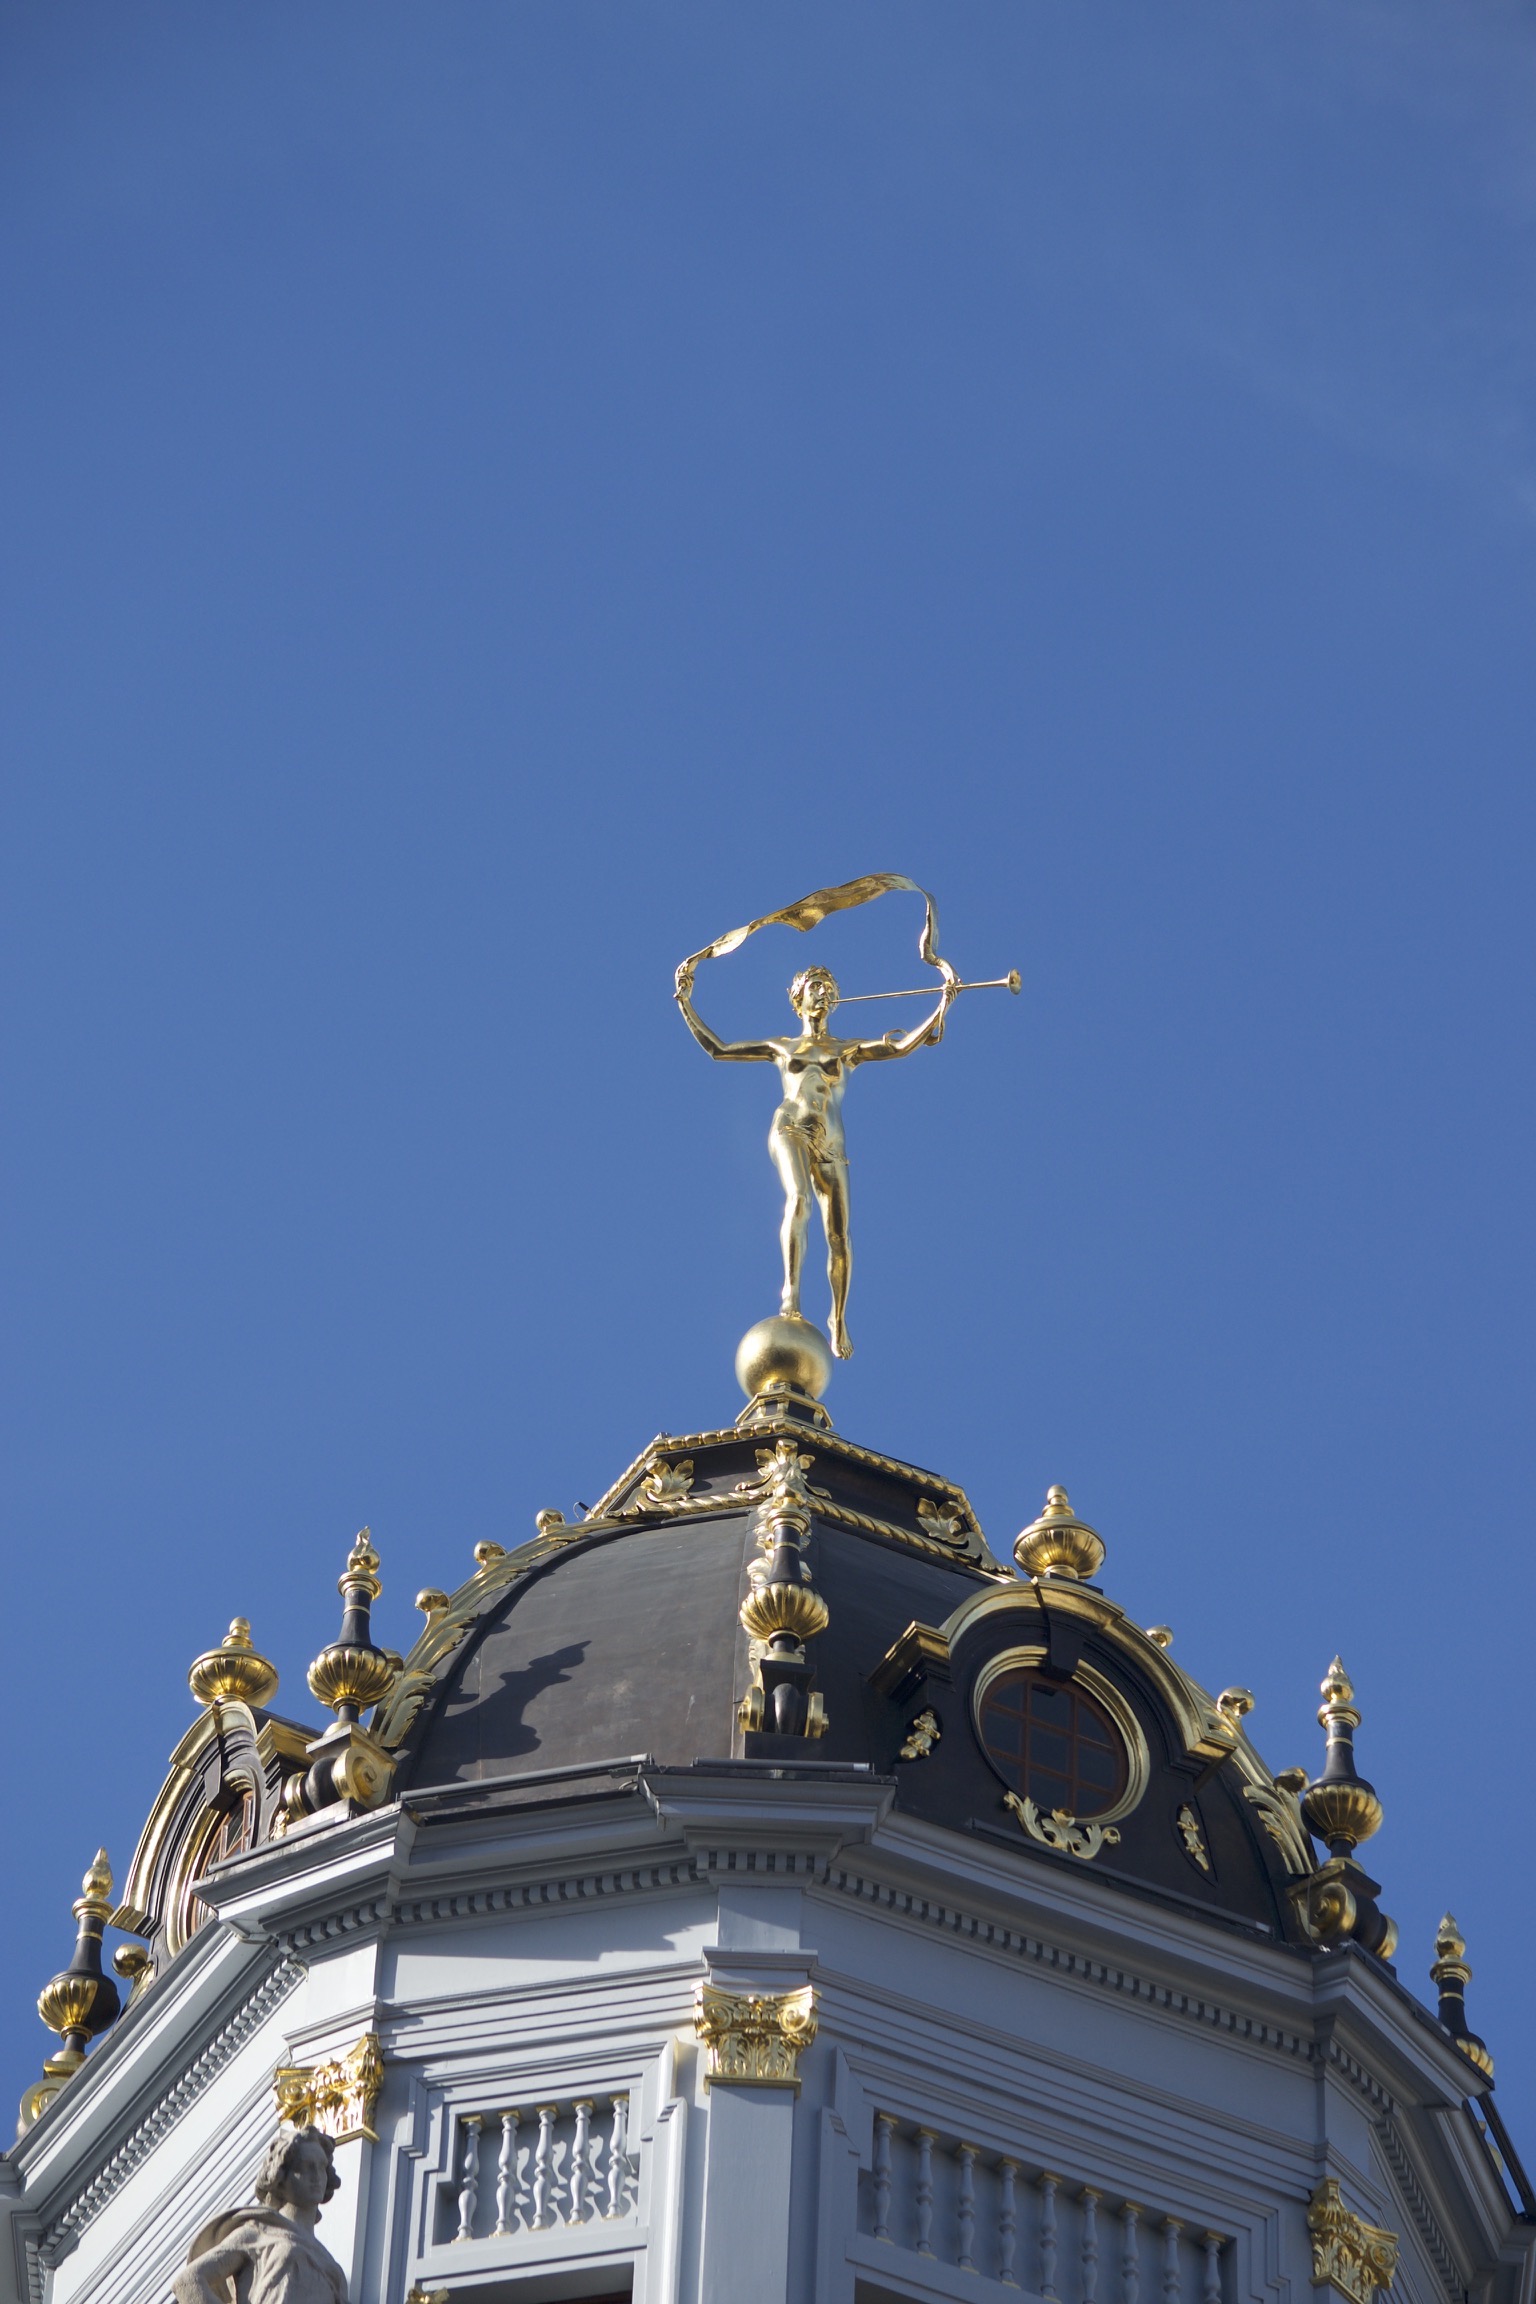 A golden figure blows a trumpet and holds a long ribbon atop a black and gilted roof dome.